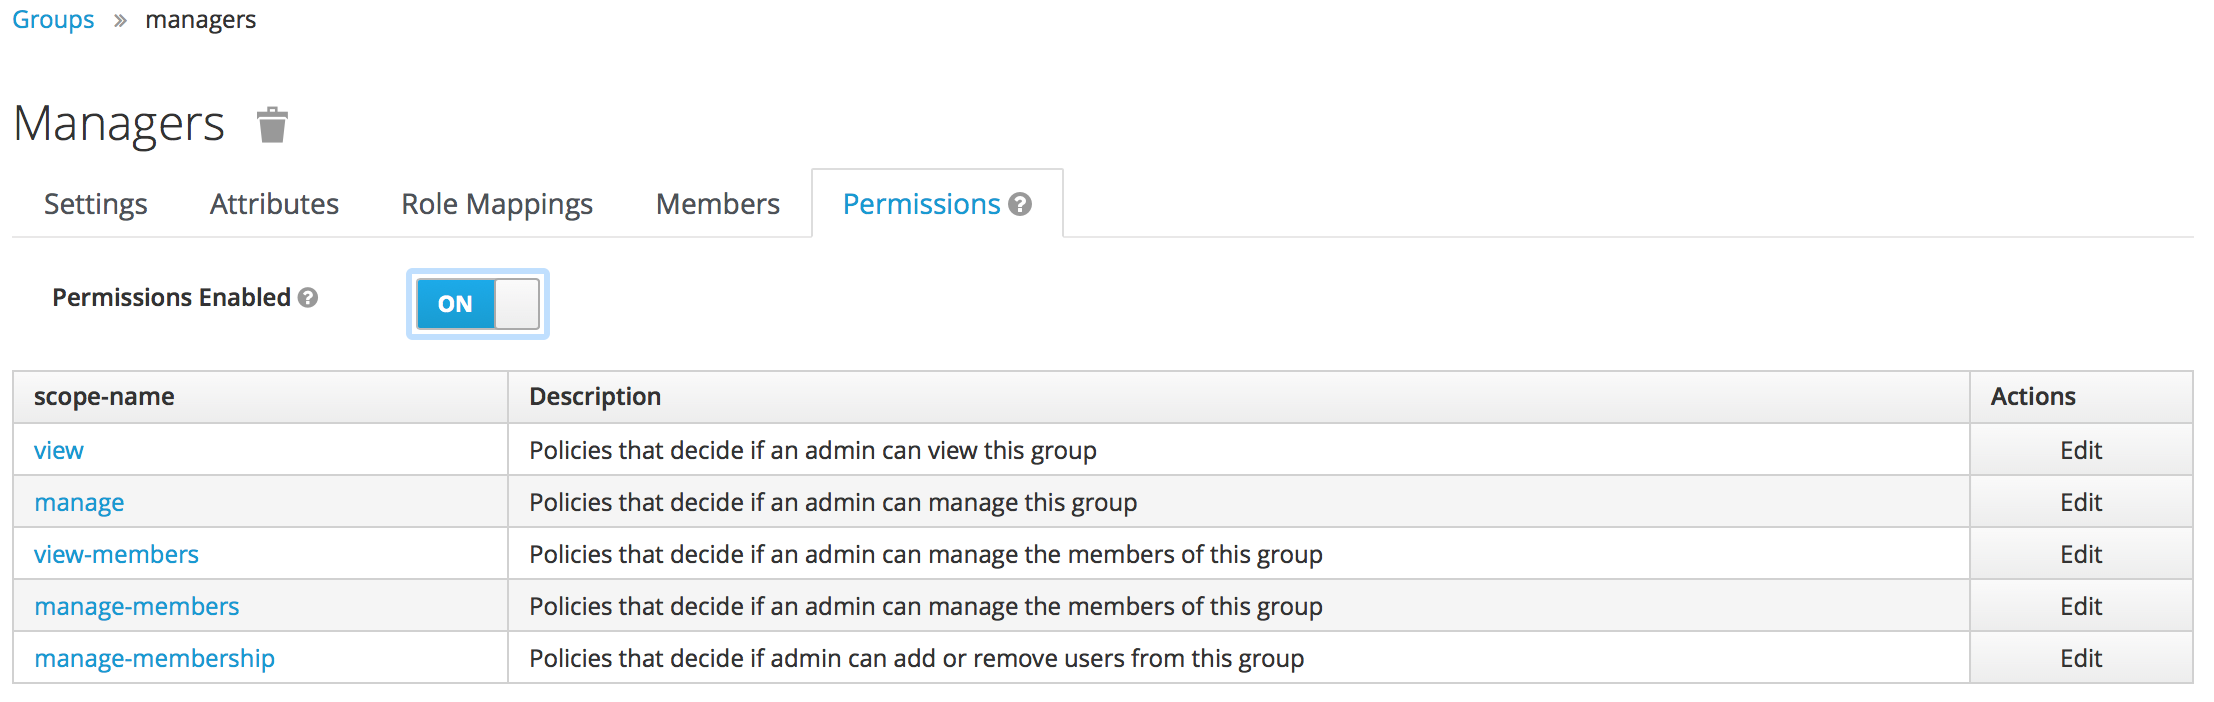 ../../_images/groups-permissions.png